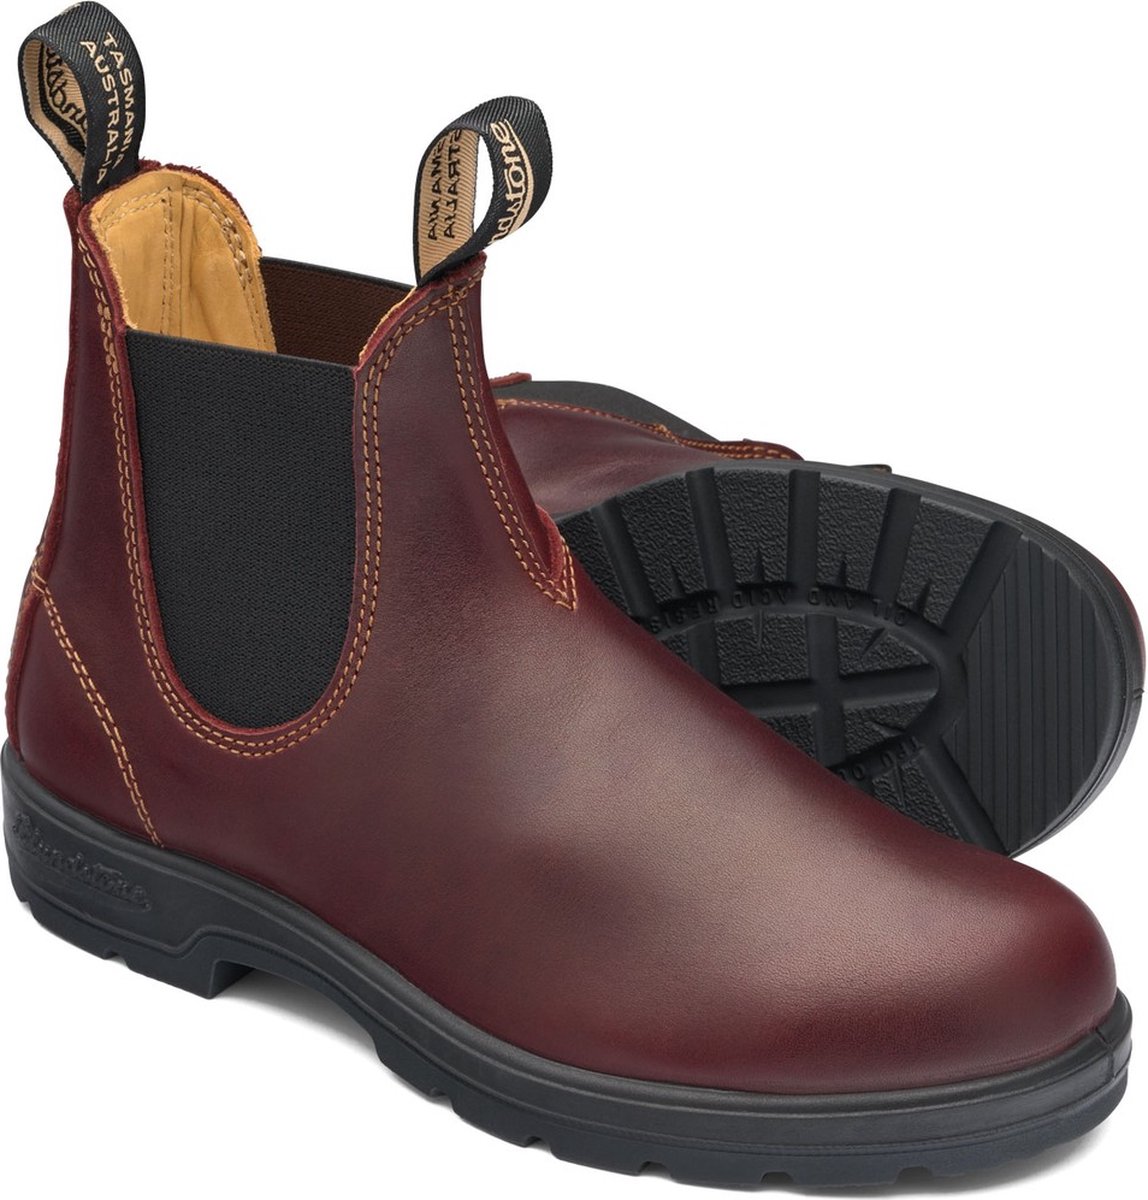 Blundstone Stiefel Boots #1440 Leather (550 Series) Redwood-11UK